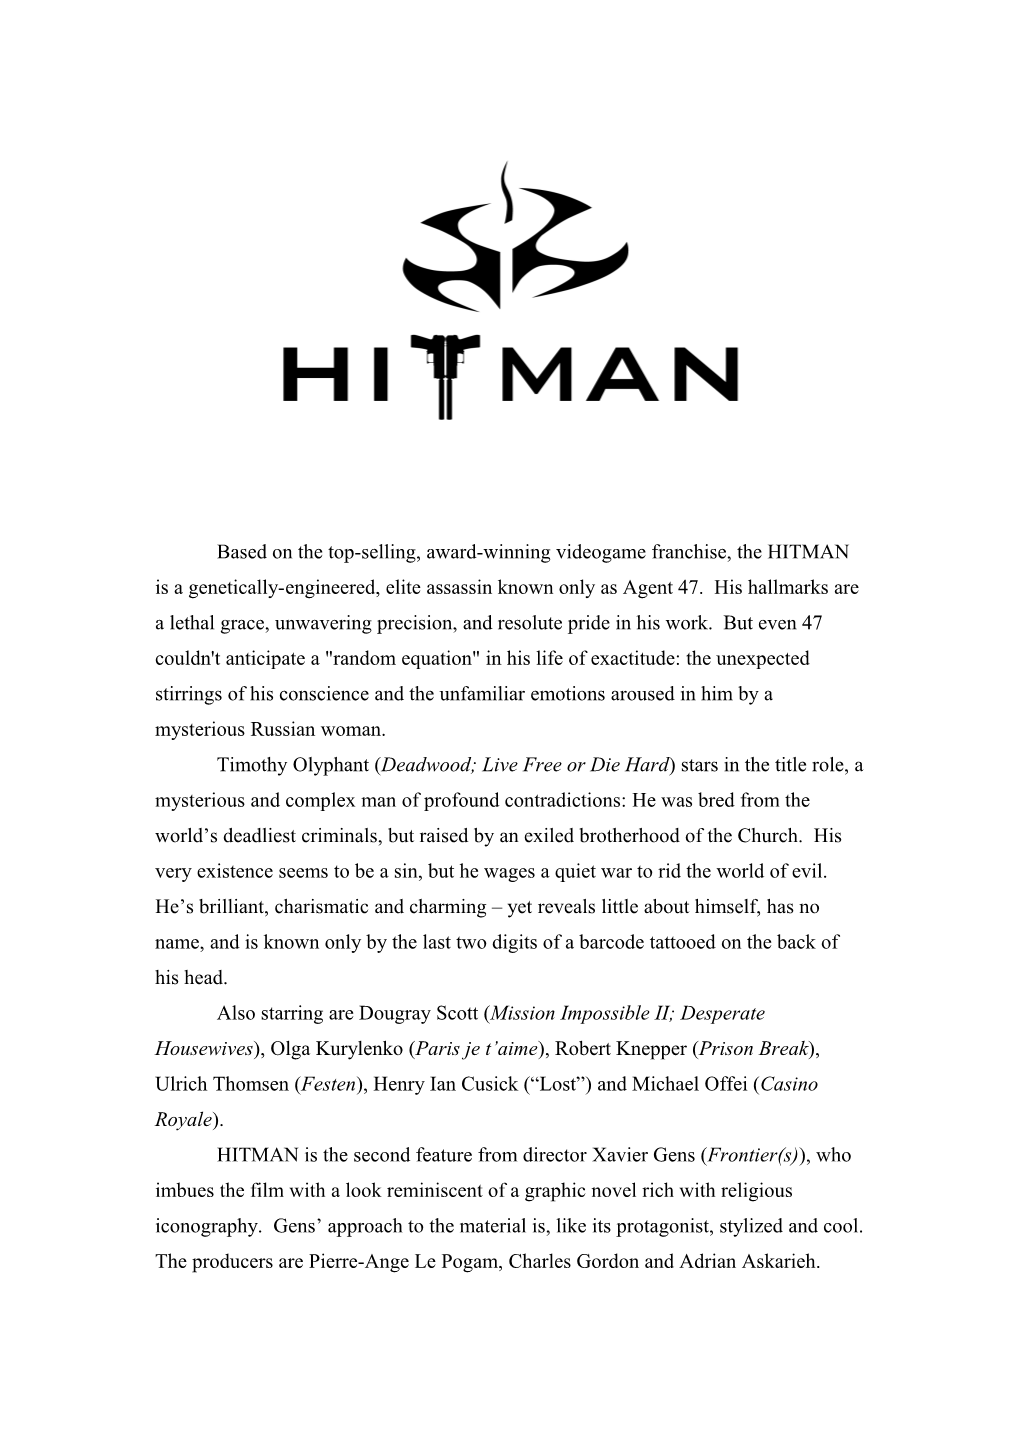 Based on the Top-Selling, Award-Winning Videogame Franchise, the Hitmanis A